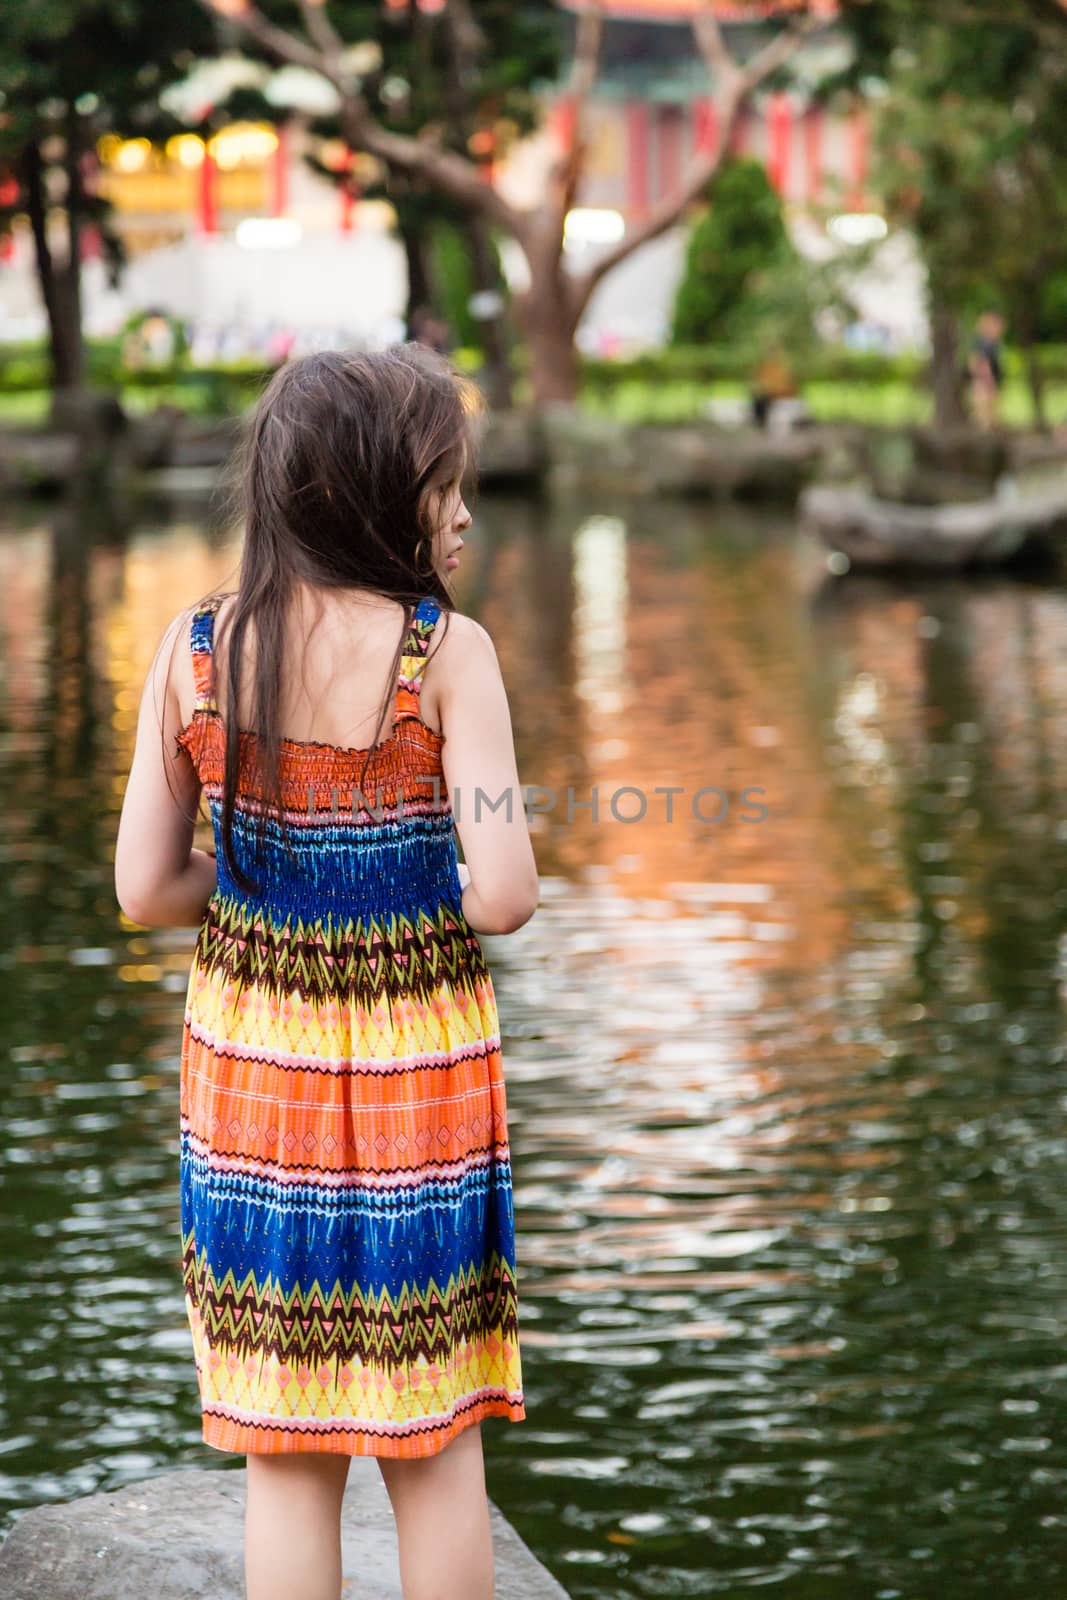 Young girl in colorful dress by lake